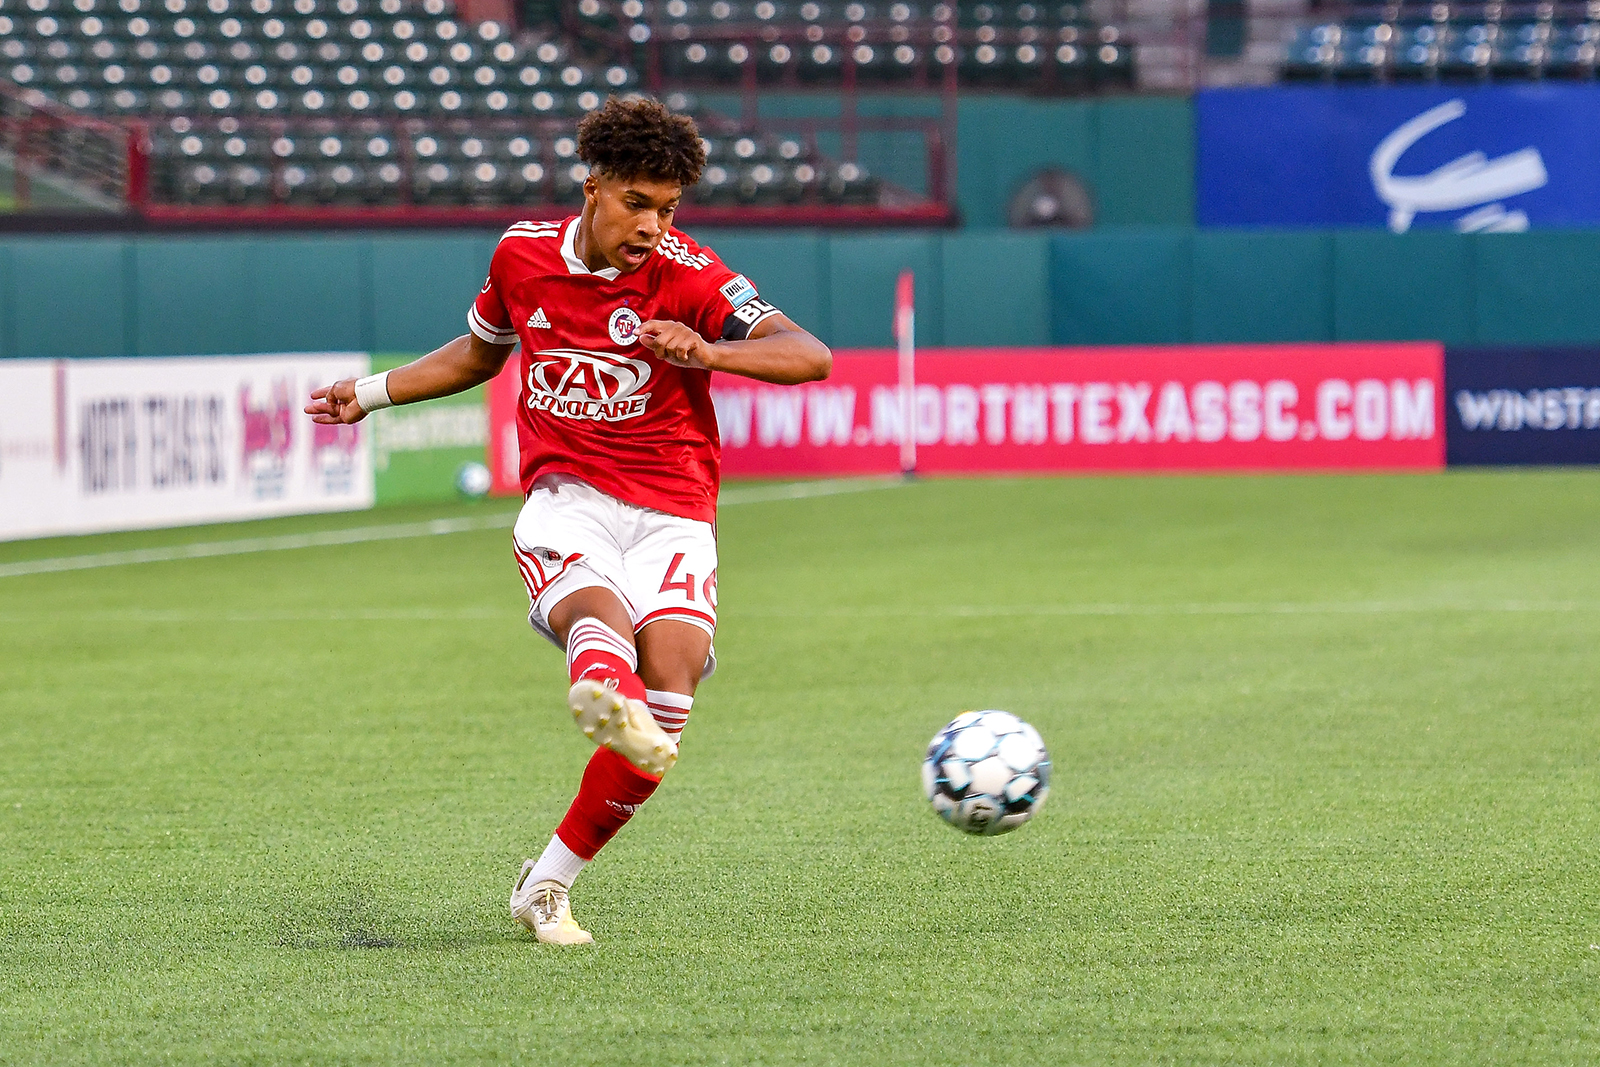 Justin Che sends a ball into the box in the first half of the USL League One match between North Texas SC and Forward Madison at Globe Life Park. (Daniel McCullough, 3rd Degree)